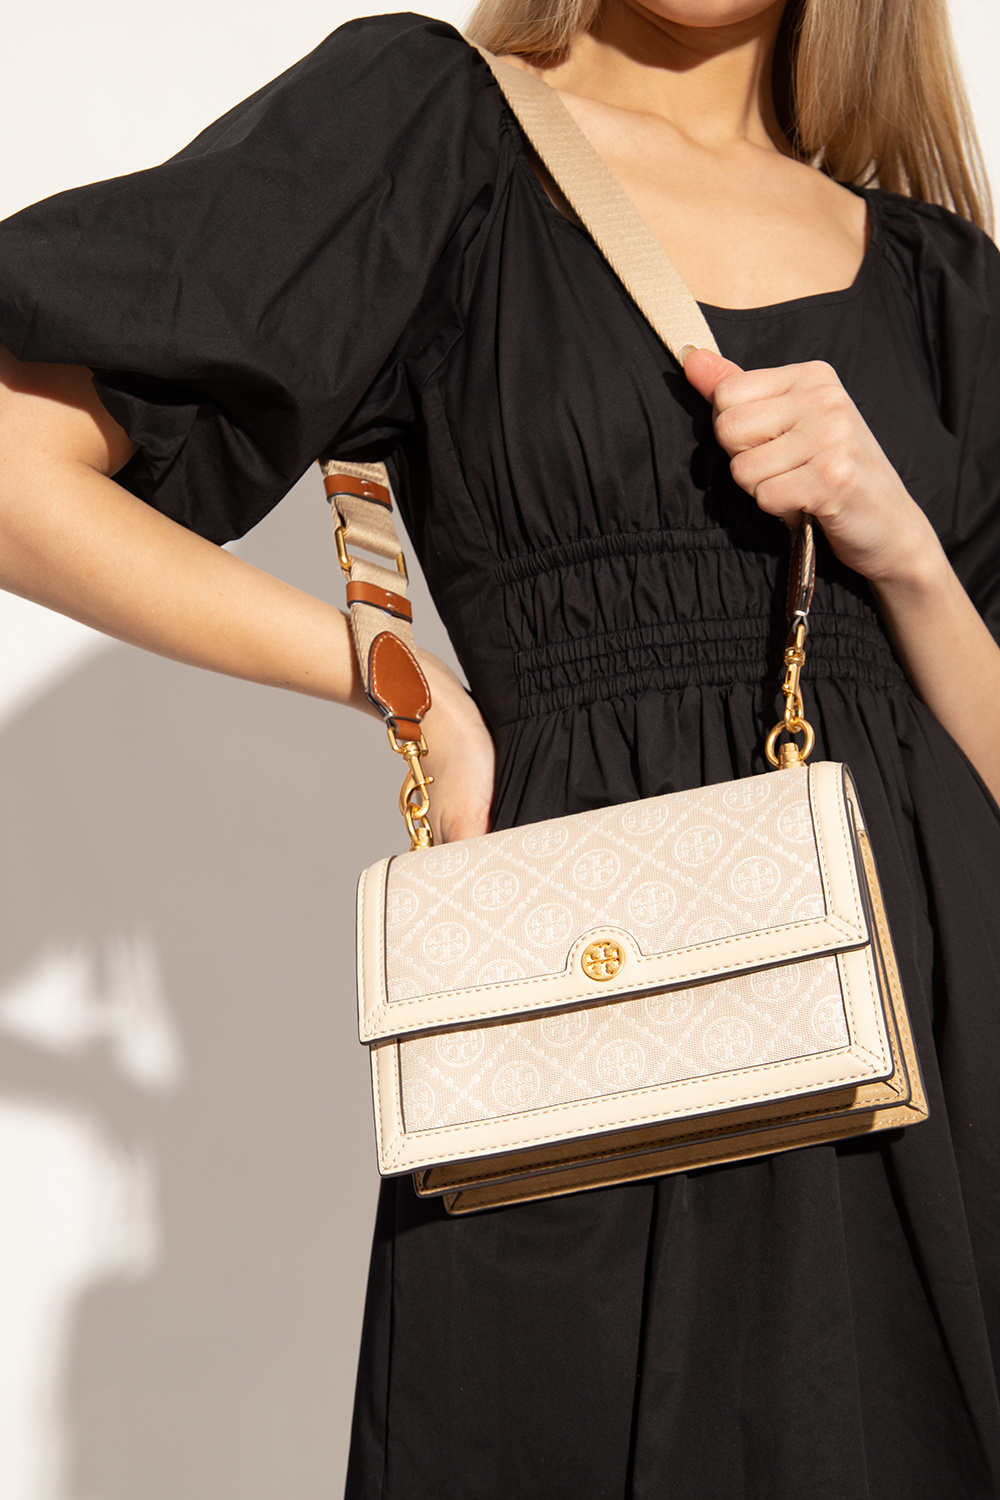 TORY BURCH INTRODUCES THE NEW T MONOGRAM - Time International